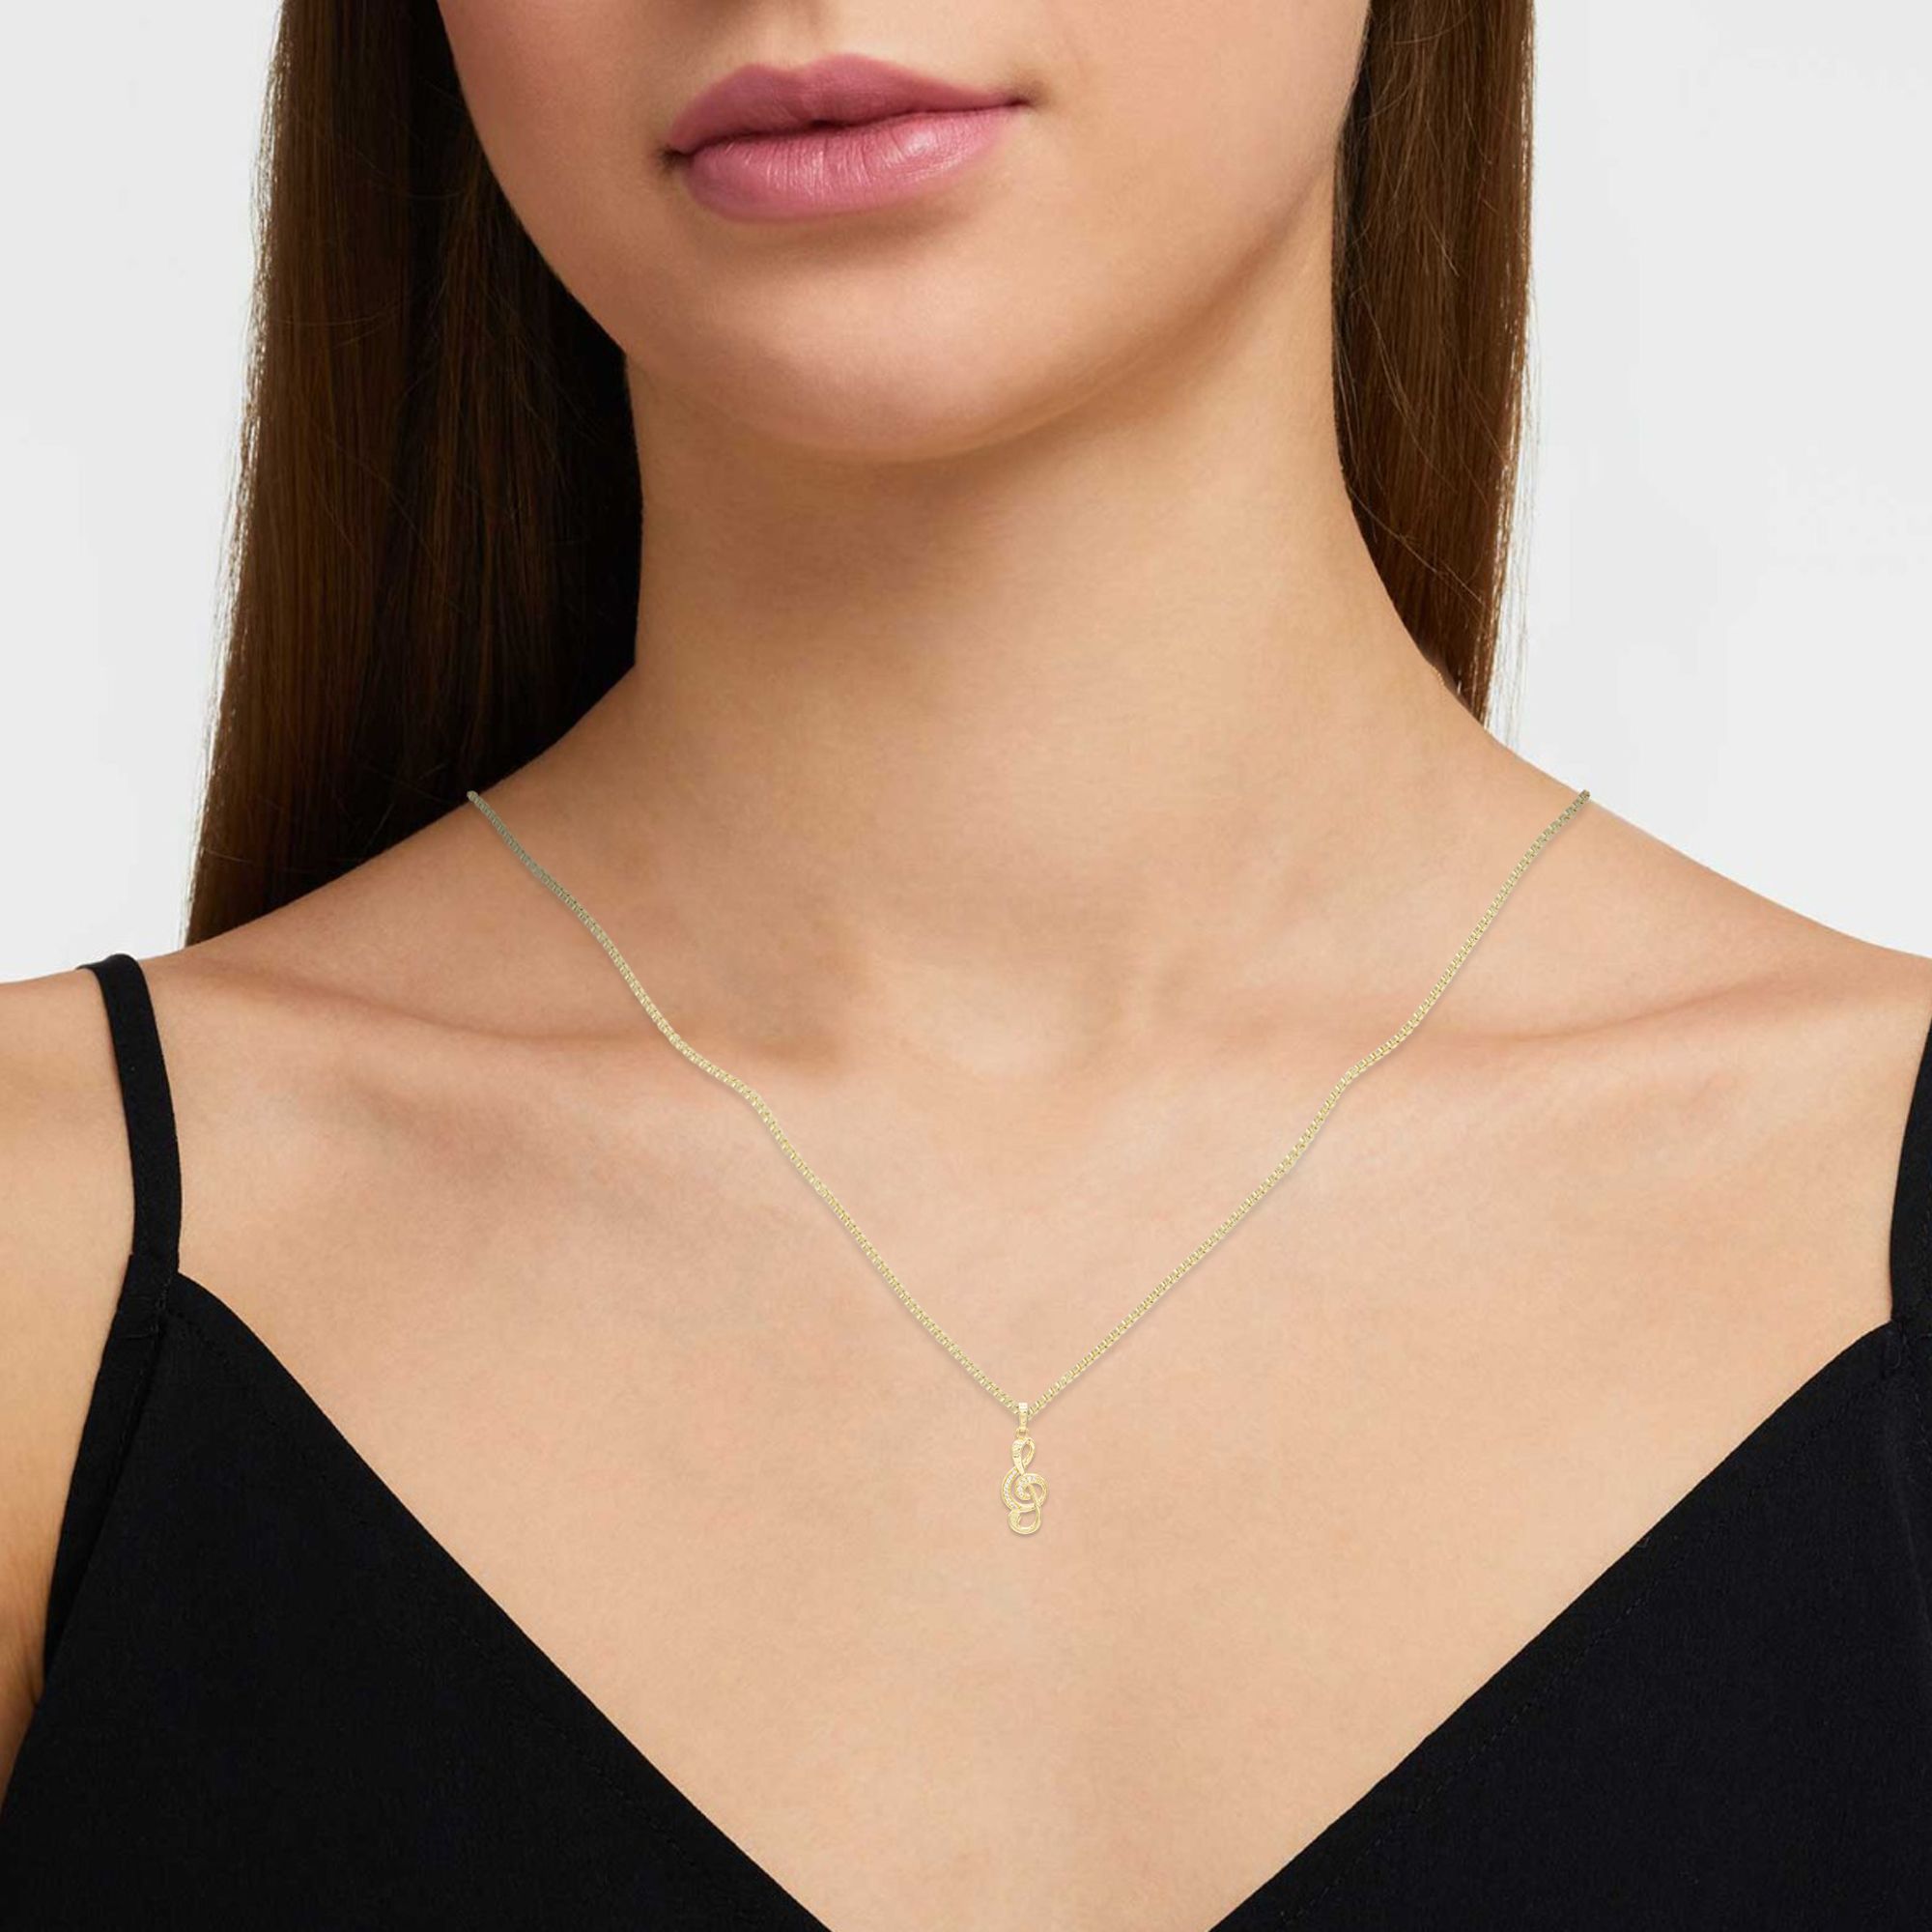 Cubic Zirconia 14K Gold Filled Music Note Pendant Necklace Set